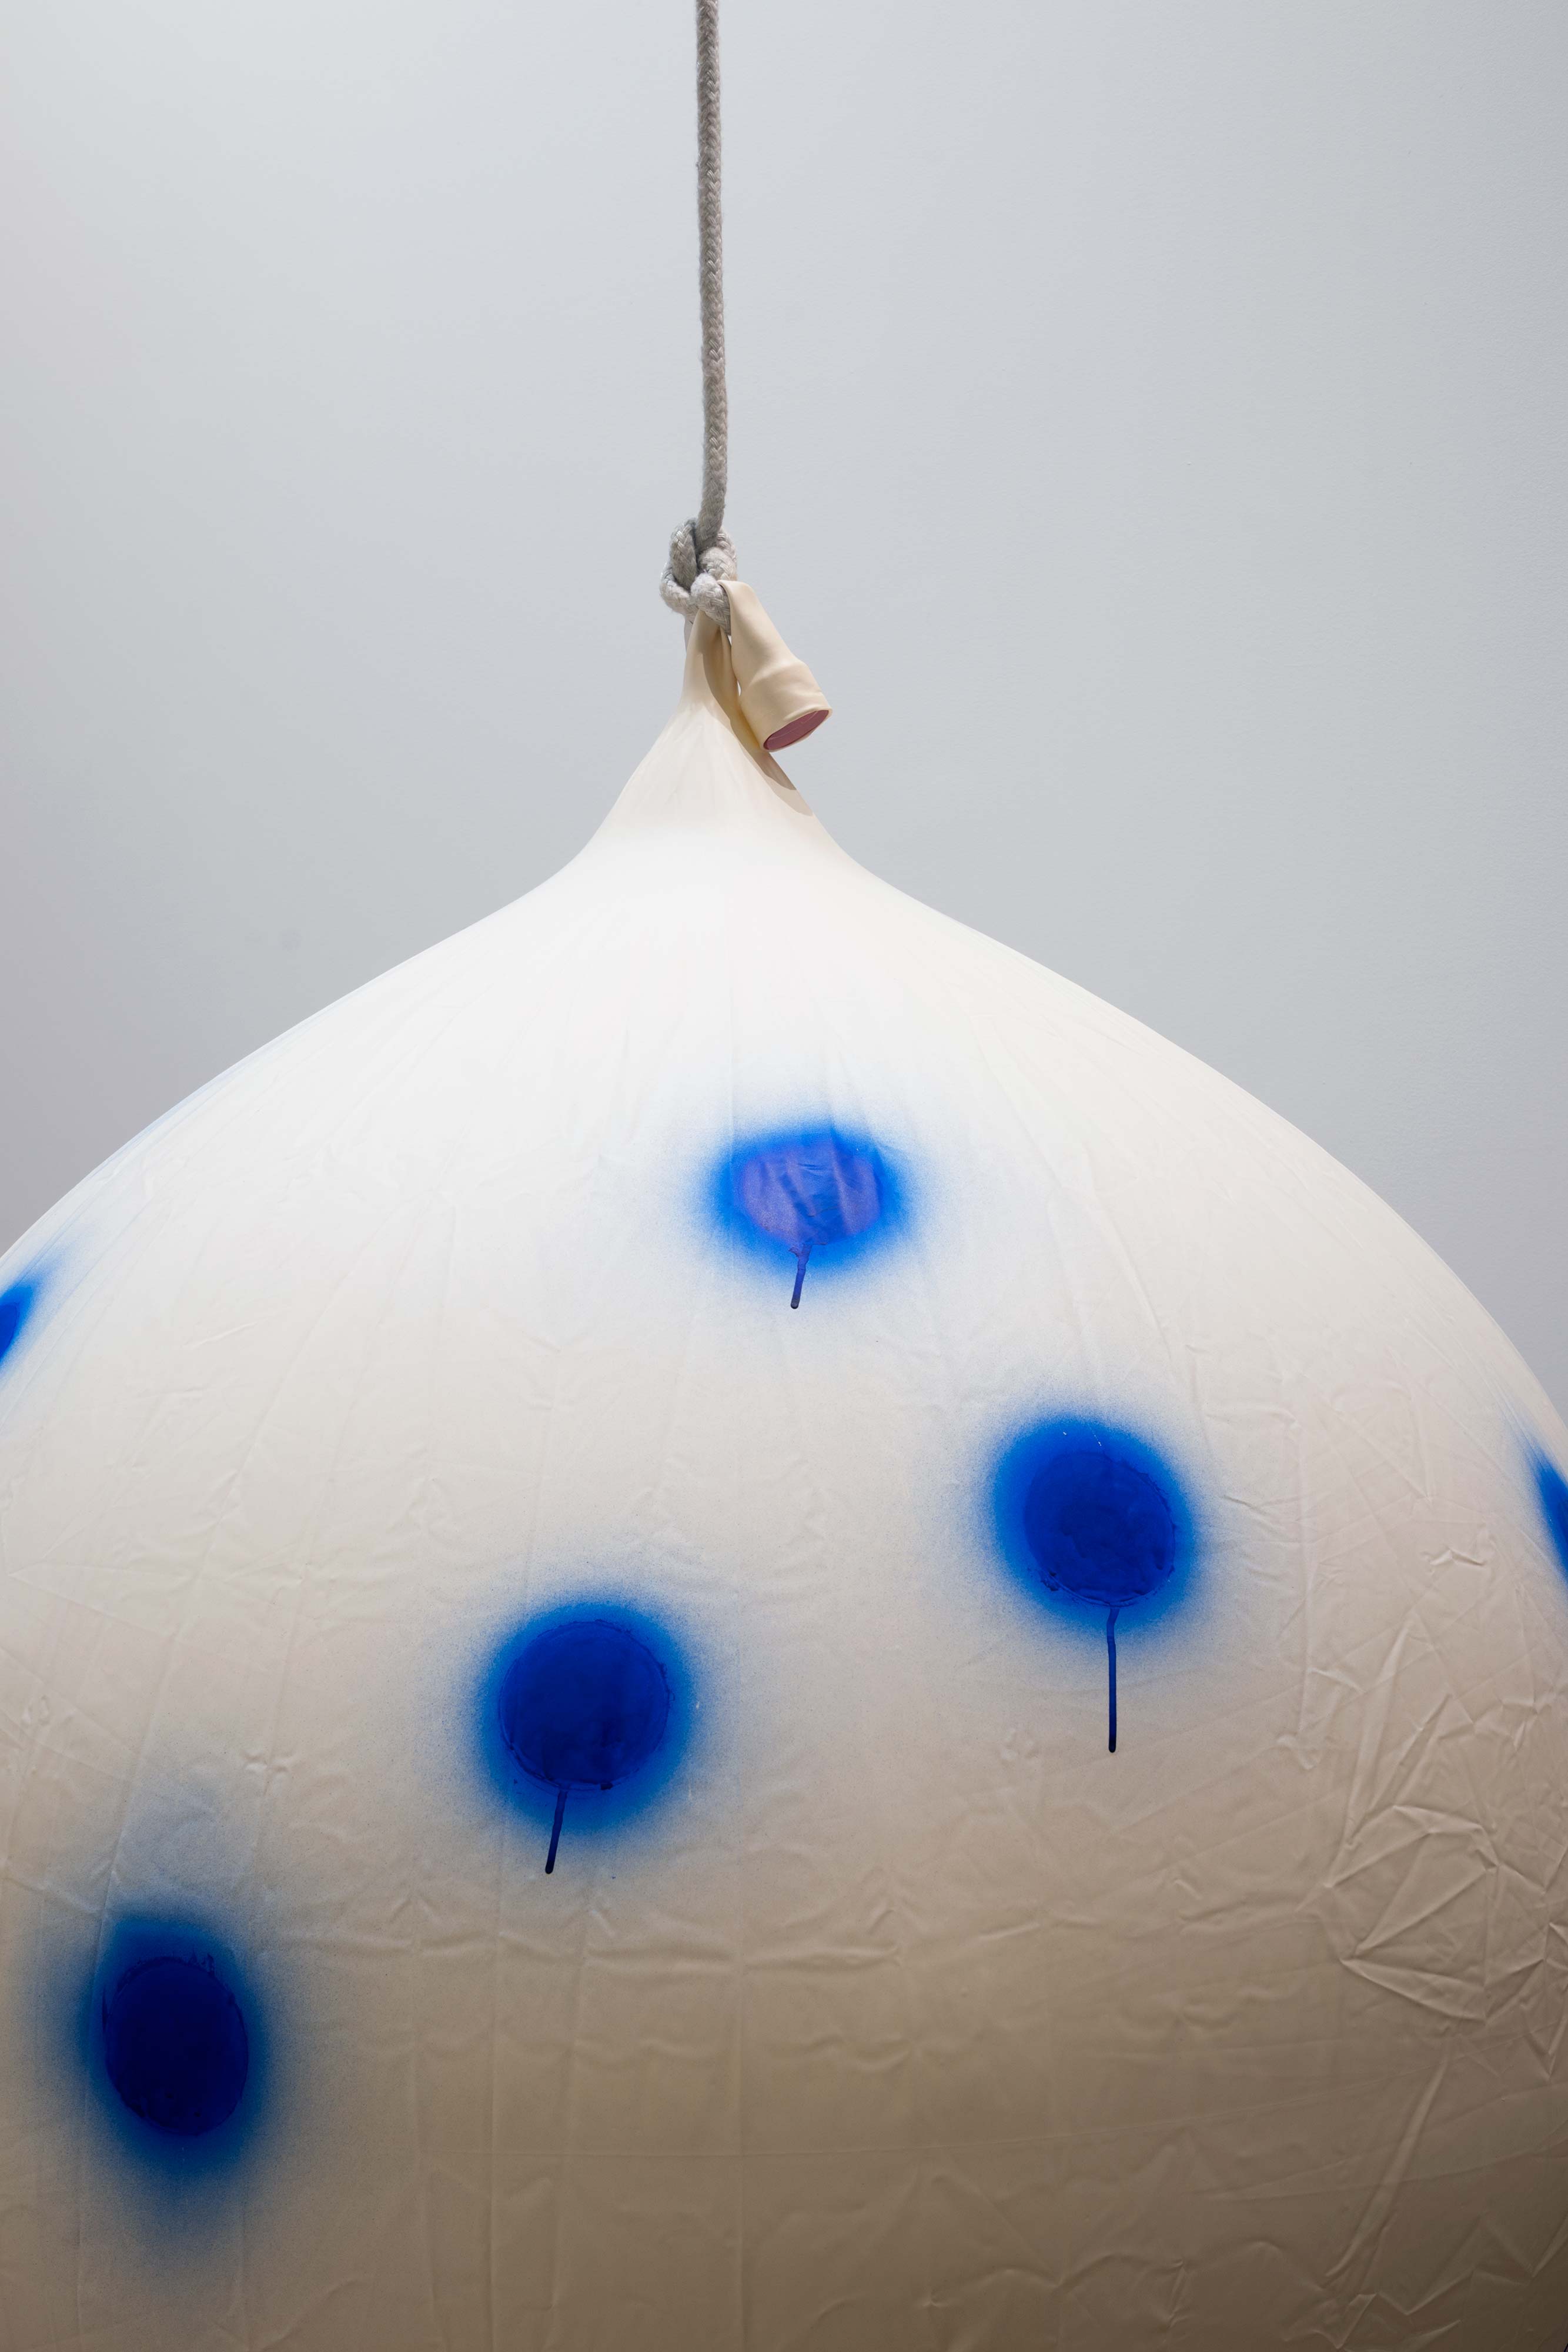 Nancy Davidson<br>Fallen Cloud (detail)<br>1997-2016<br>latex, Rope, paint, cotton<br>36 x 36 in (91 x 91 cm), height variable